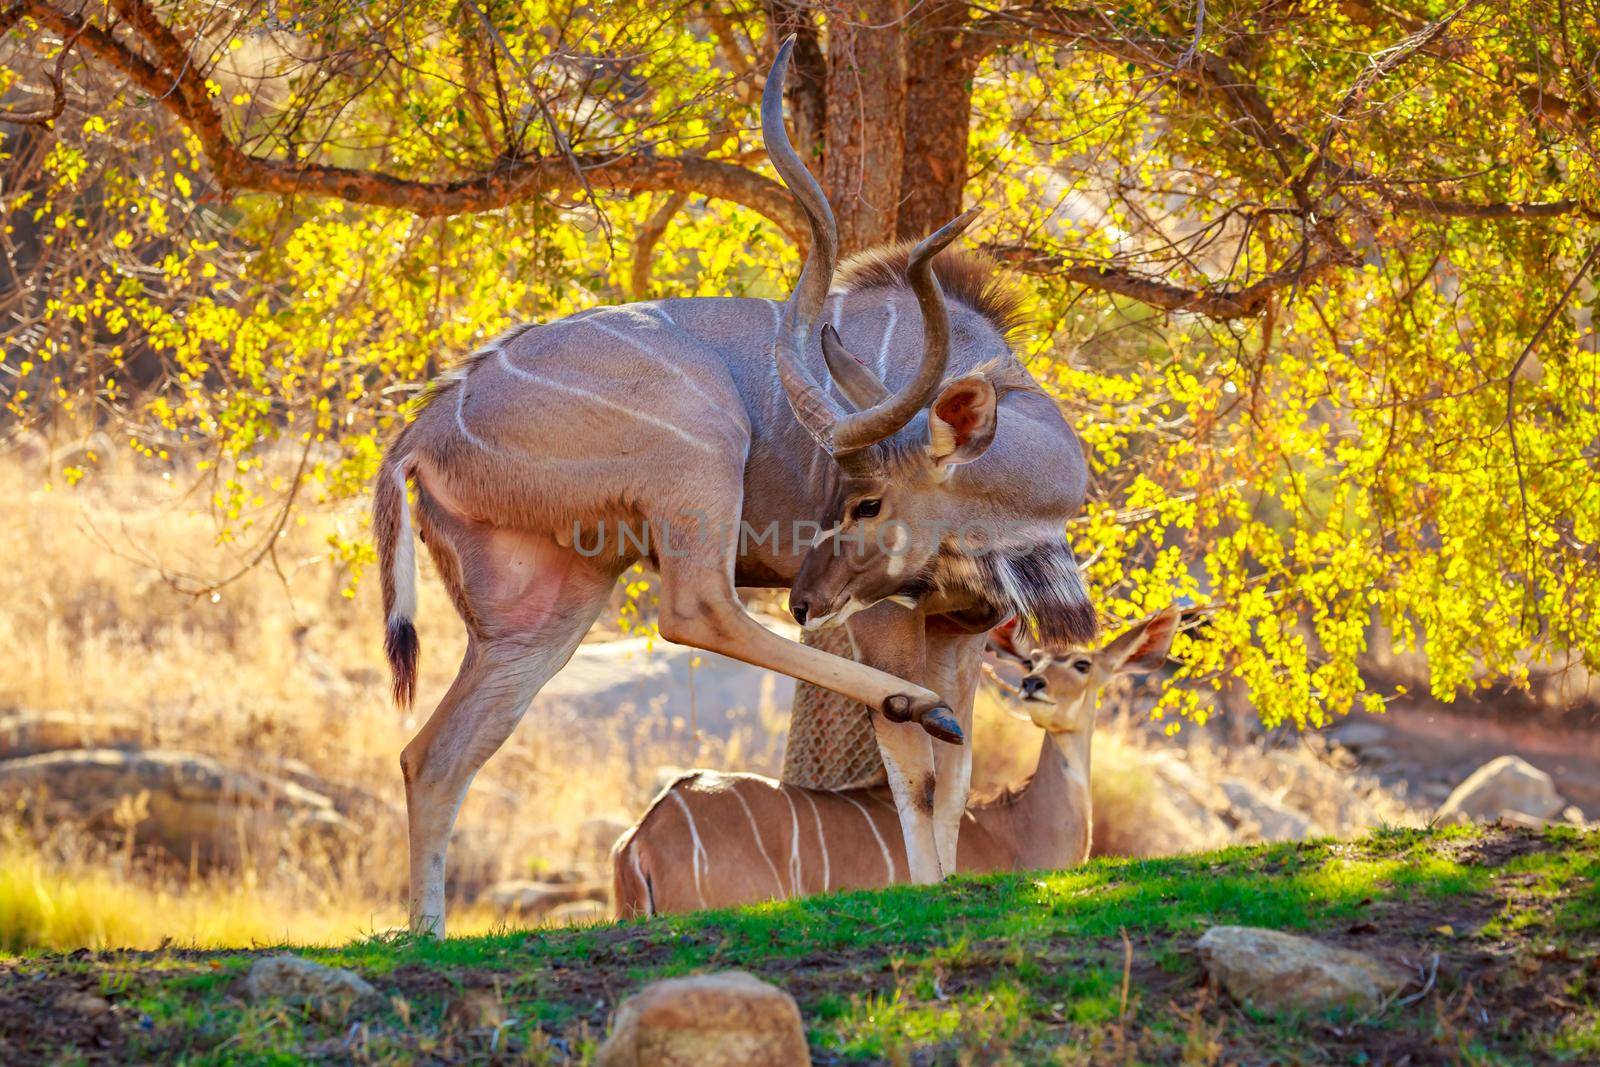 Greater Kudu rest in the shade of tree